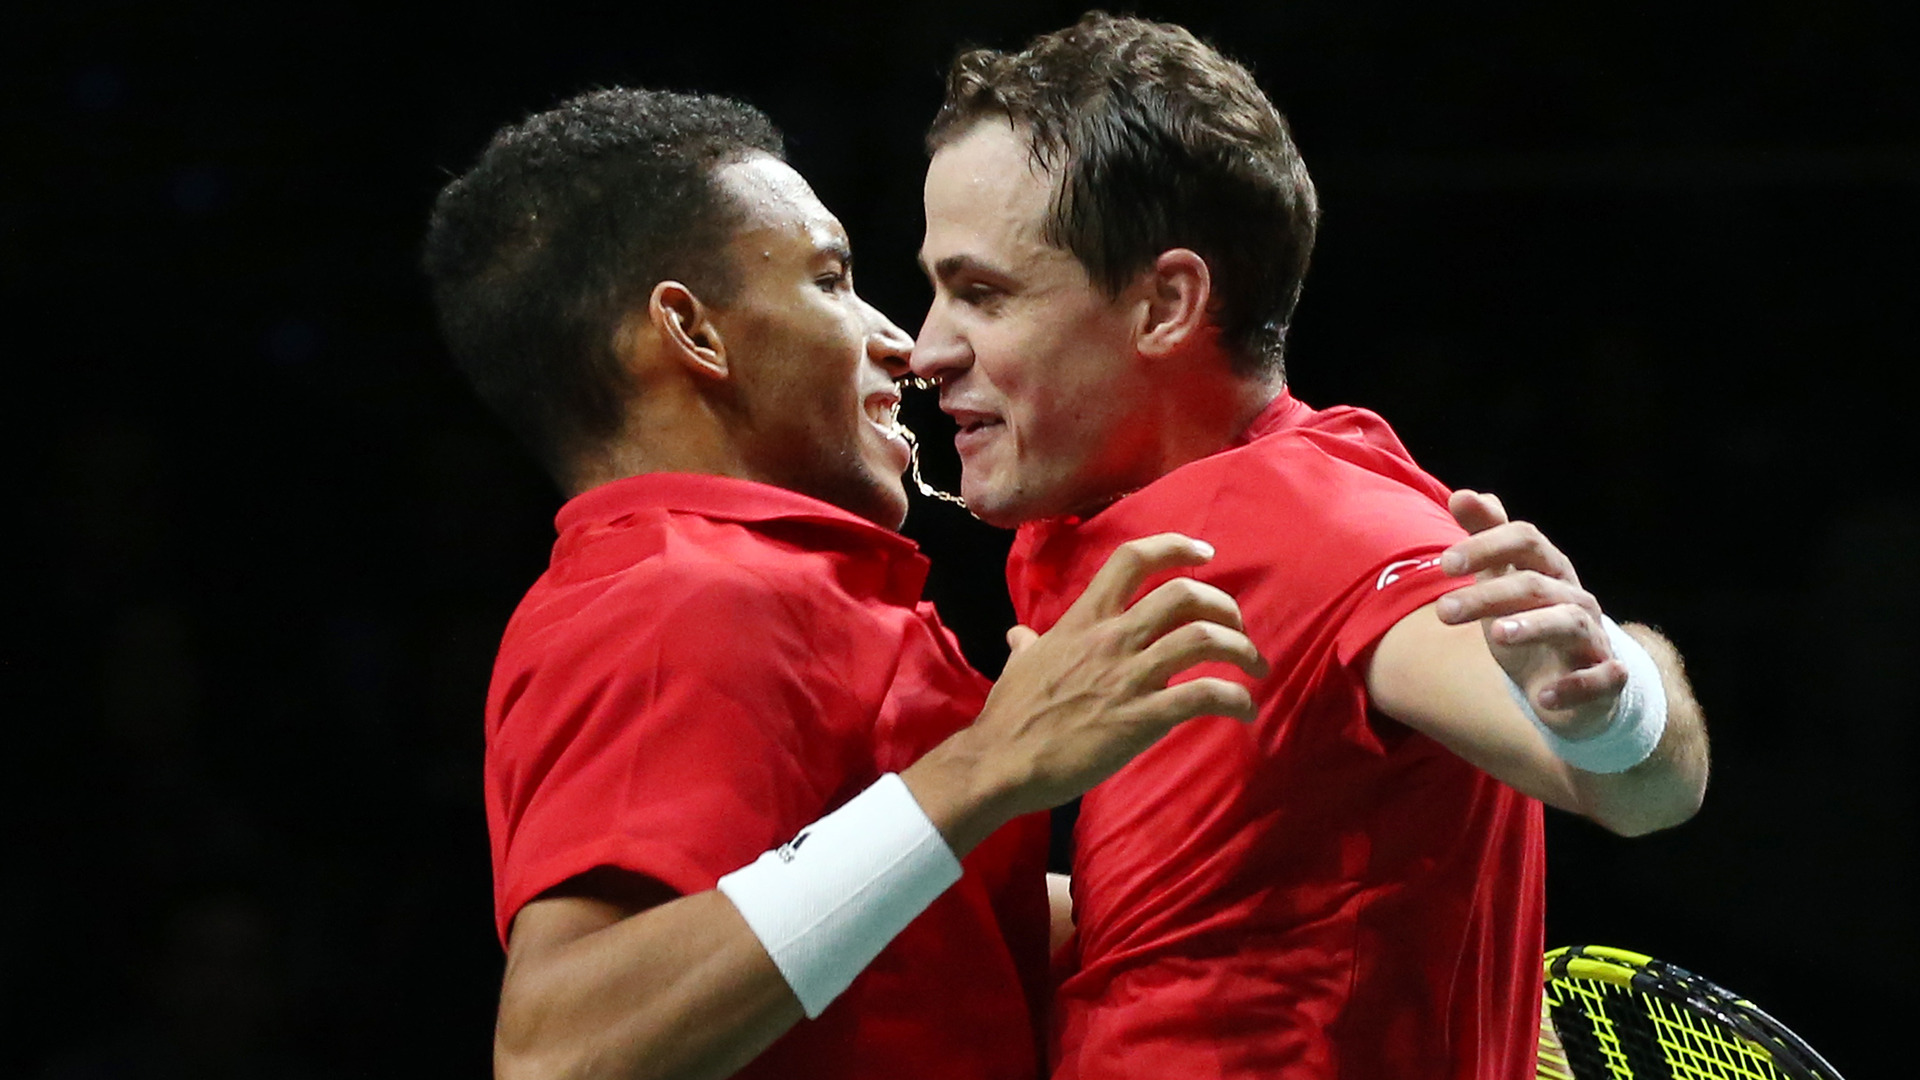 Auger-Aliassime believes Canada's Davis Cup time has come